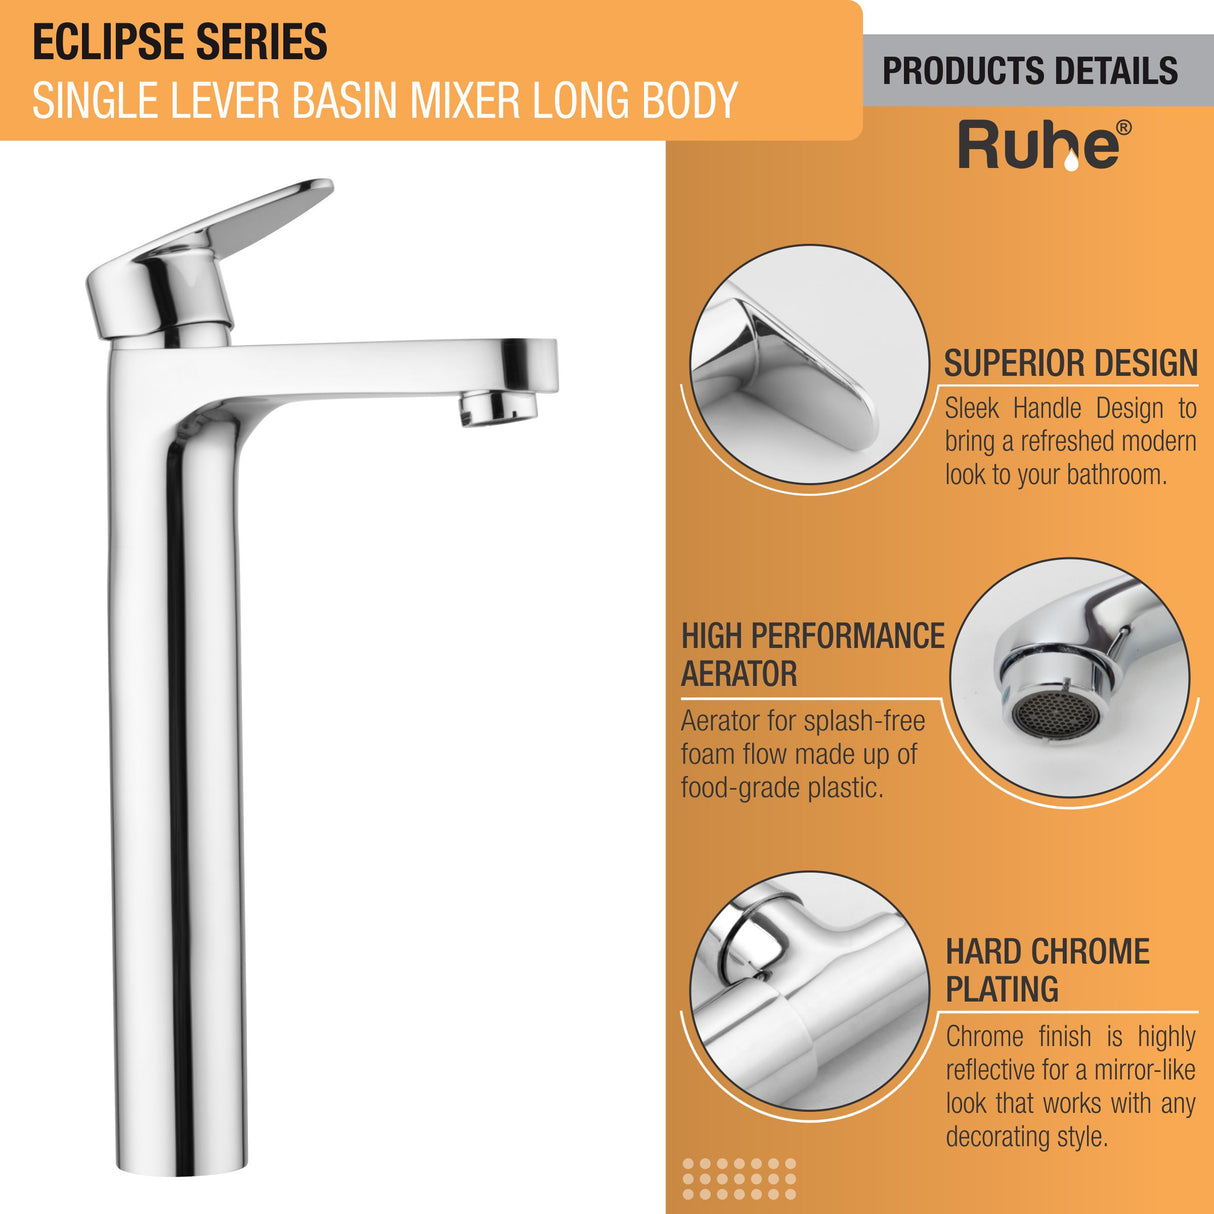 Eclipse Single Lever Tall Body Basin Brass Mixer Faucet product details